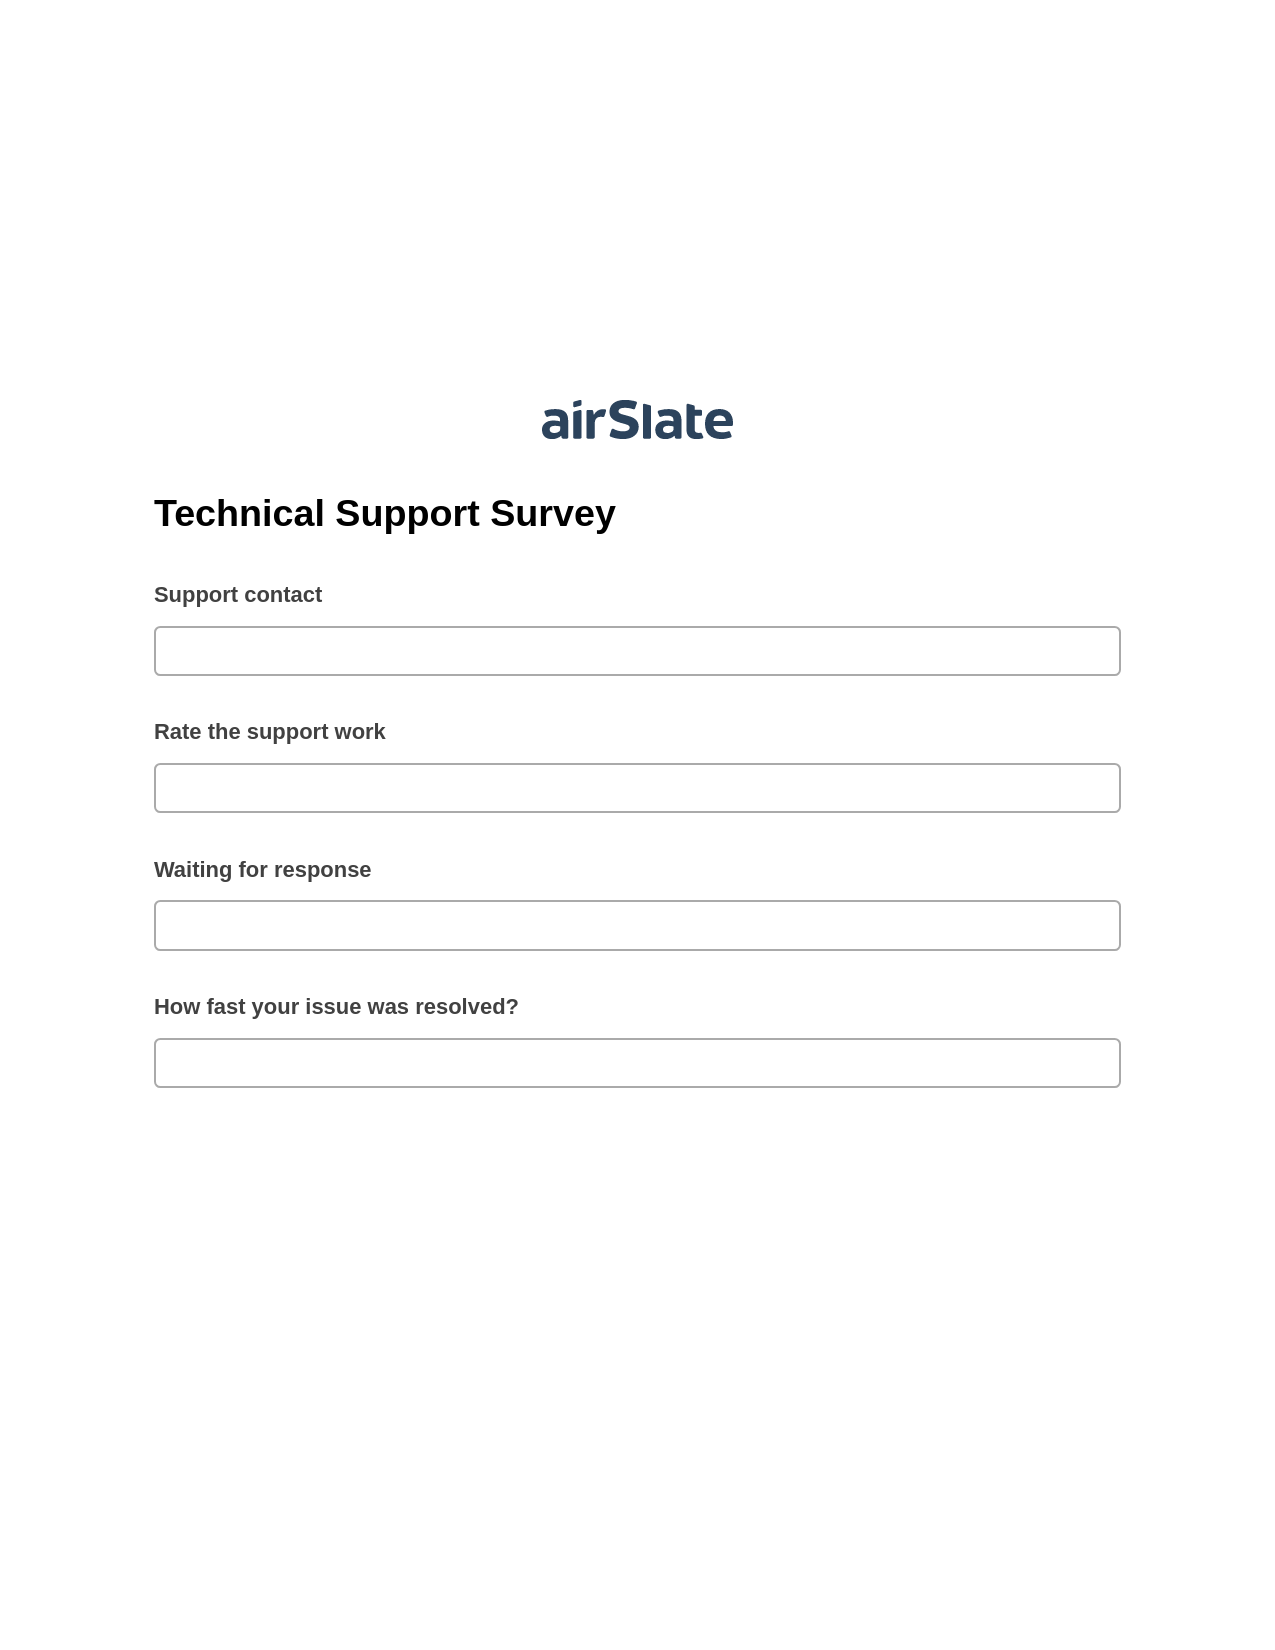 Technical Support Survey Pre-fill from Salesforce Records Bot, Create slate from another Flow Bot, Post-finish Document Bot